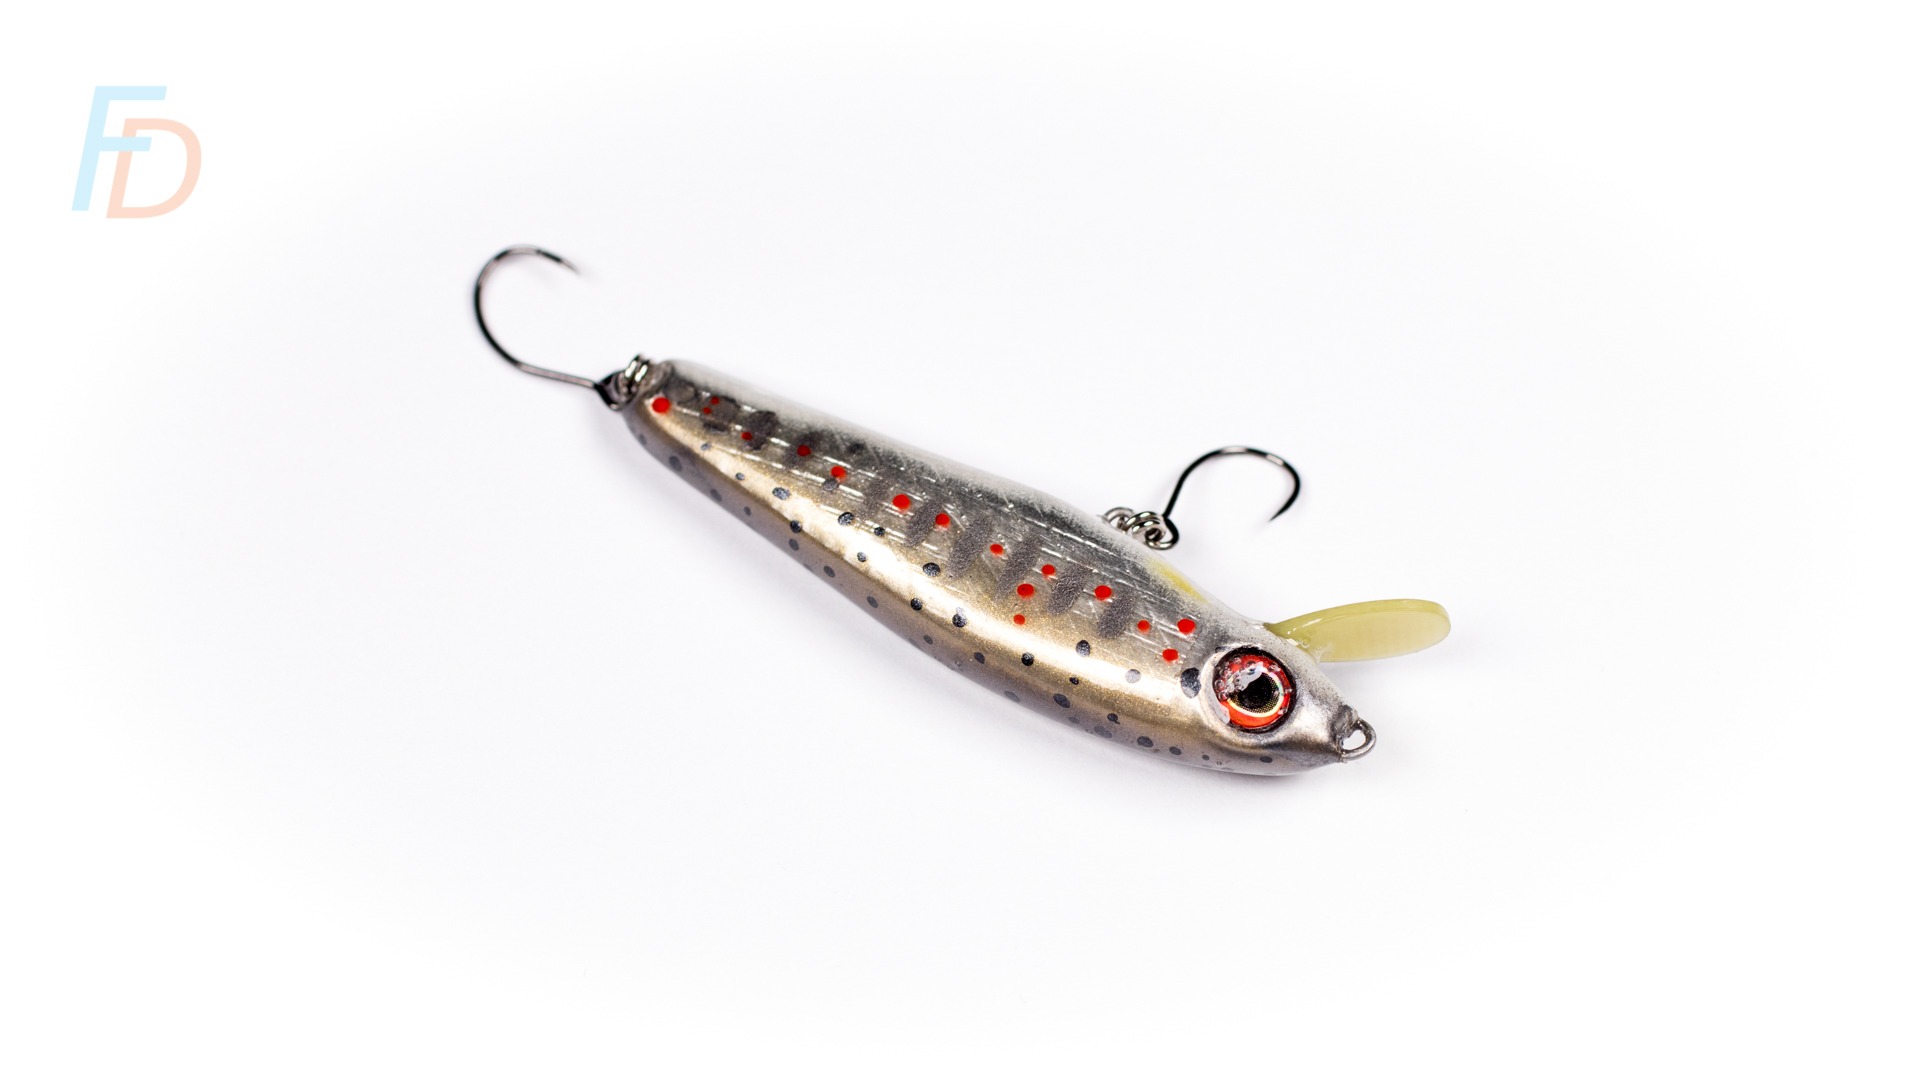 How to Make Fishing Lures: Confessions of a 1st-time Lure Builder